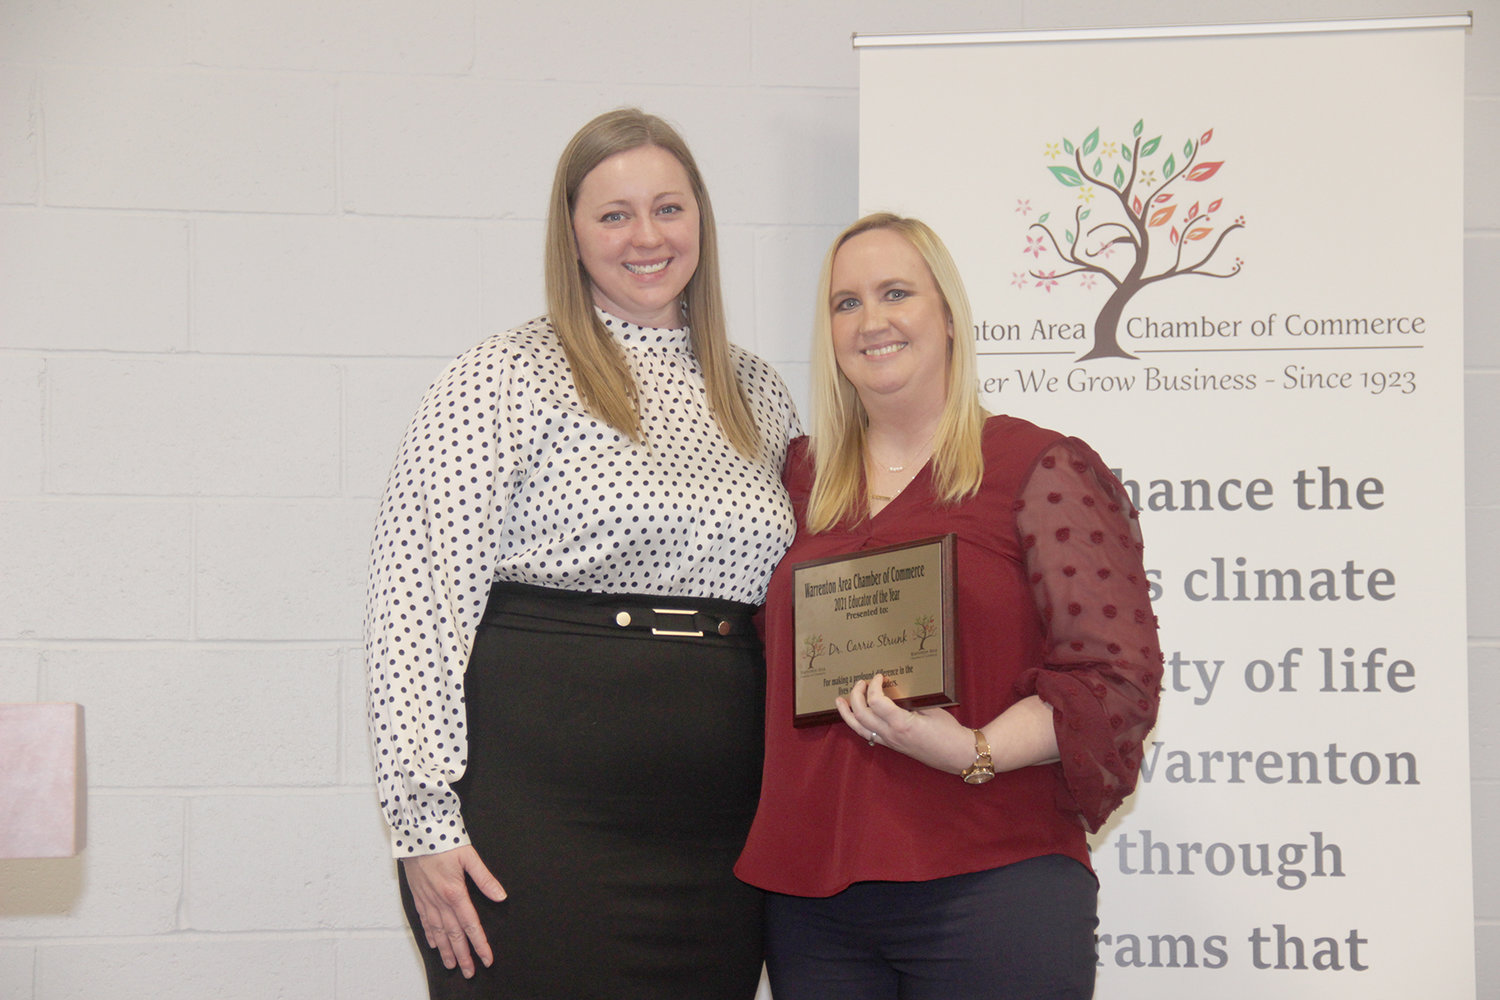 EDUCATOR OF THE YEAR — Carrie Strunk, right, receives the Educator of the Year award from Warrenton Chamber President Katie Joyce. Strunk is a curriculum coordinator who helped the Warren County R-III School District adapt to educate students during the COVID pandemic.